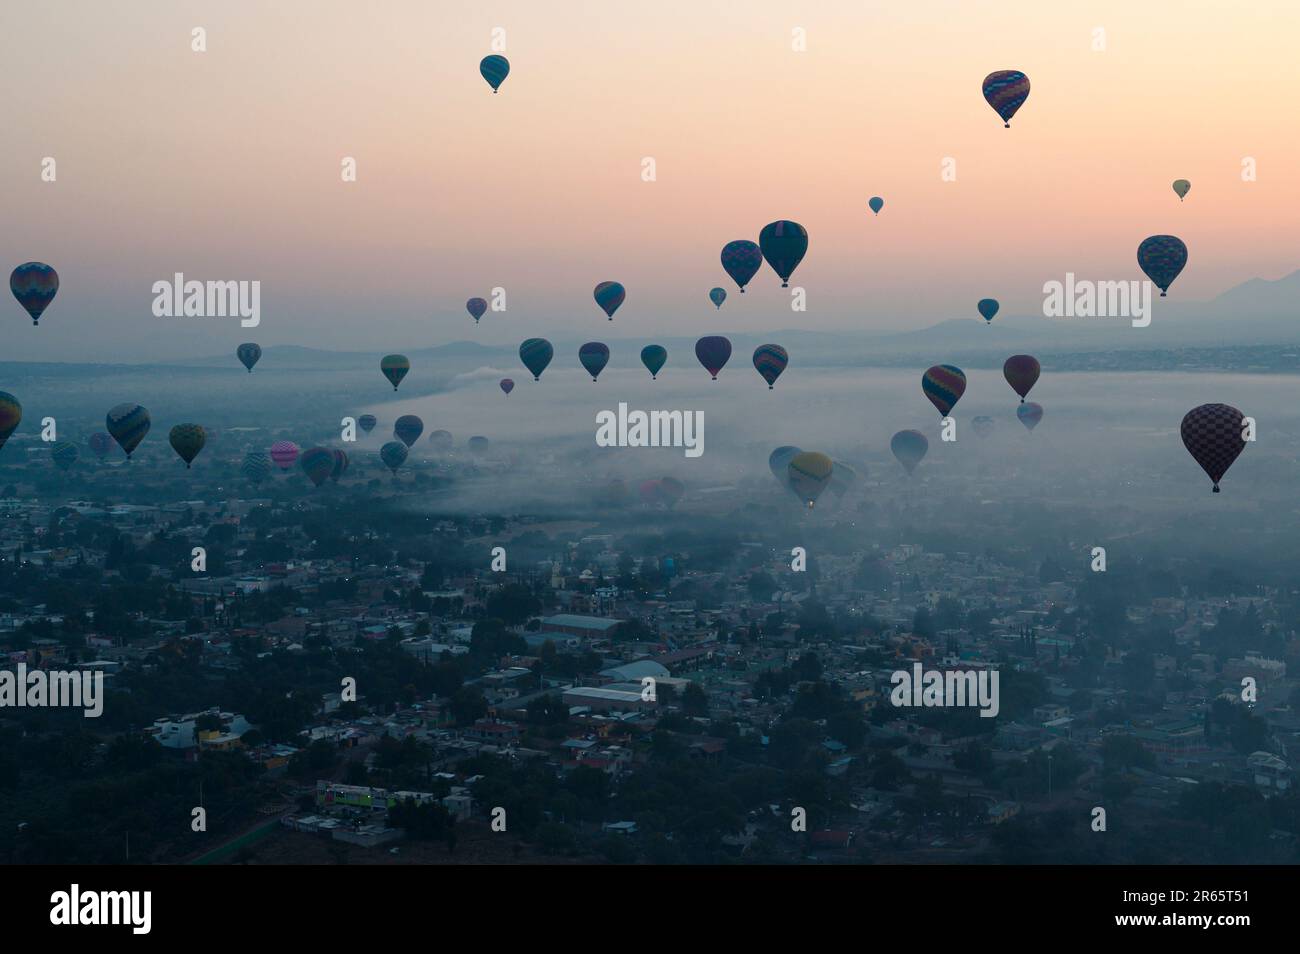 An aerial shot of colorful hot air balloons flying high above the city skyline at sunset. Stock Photo